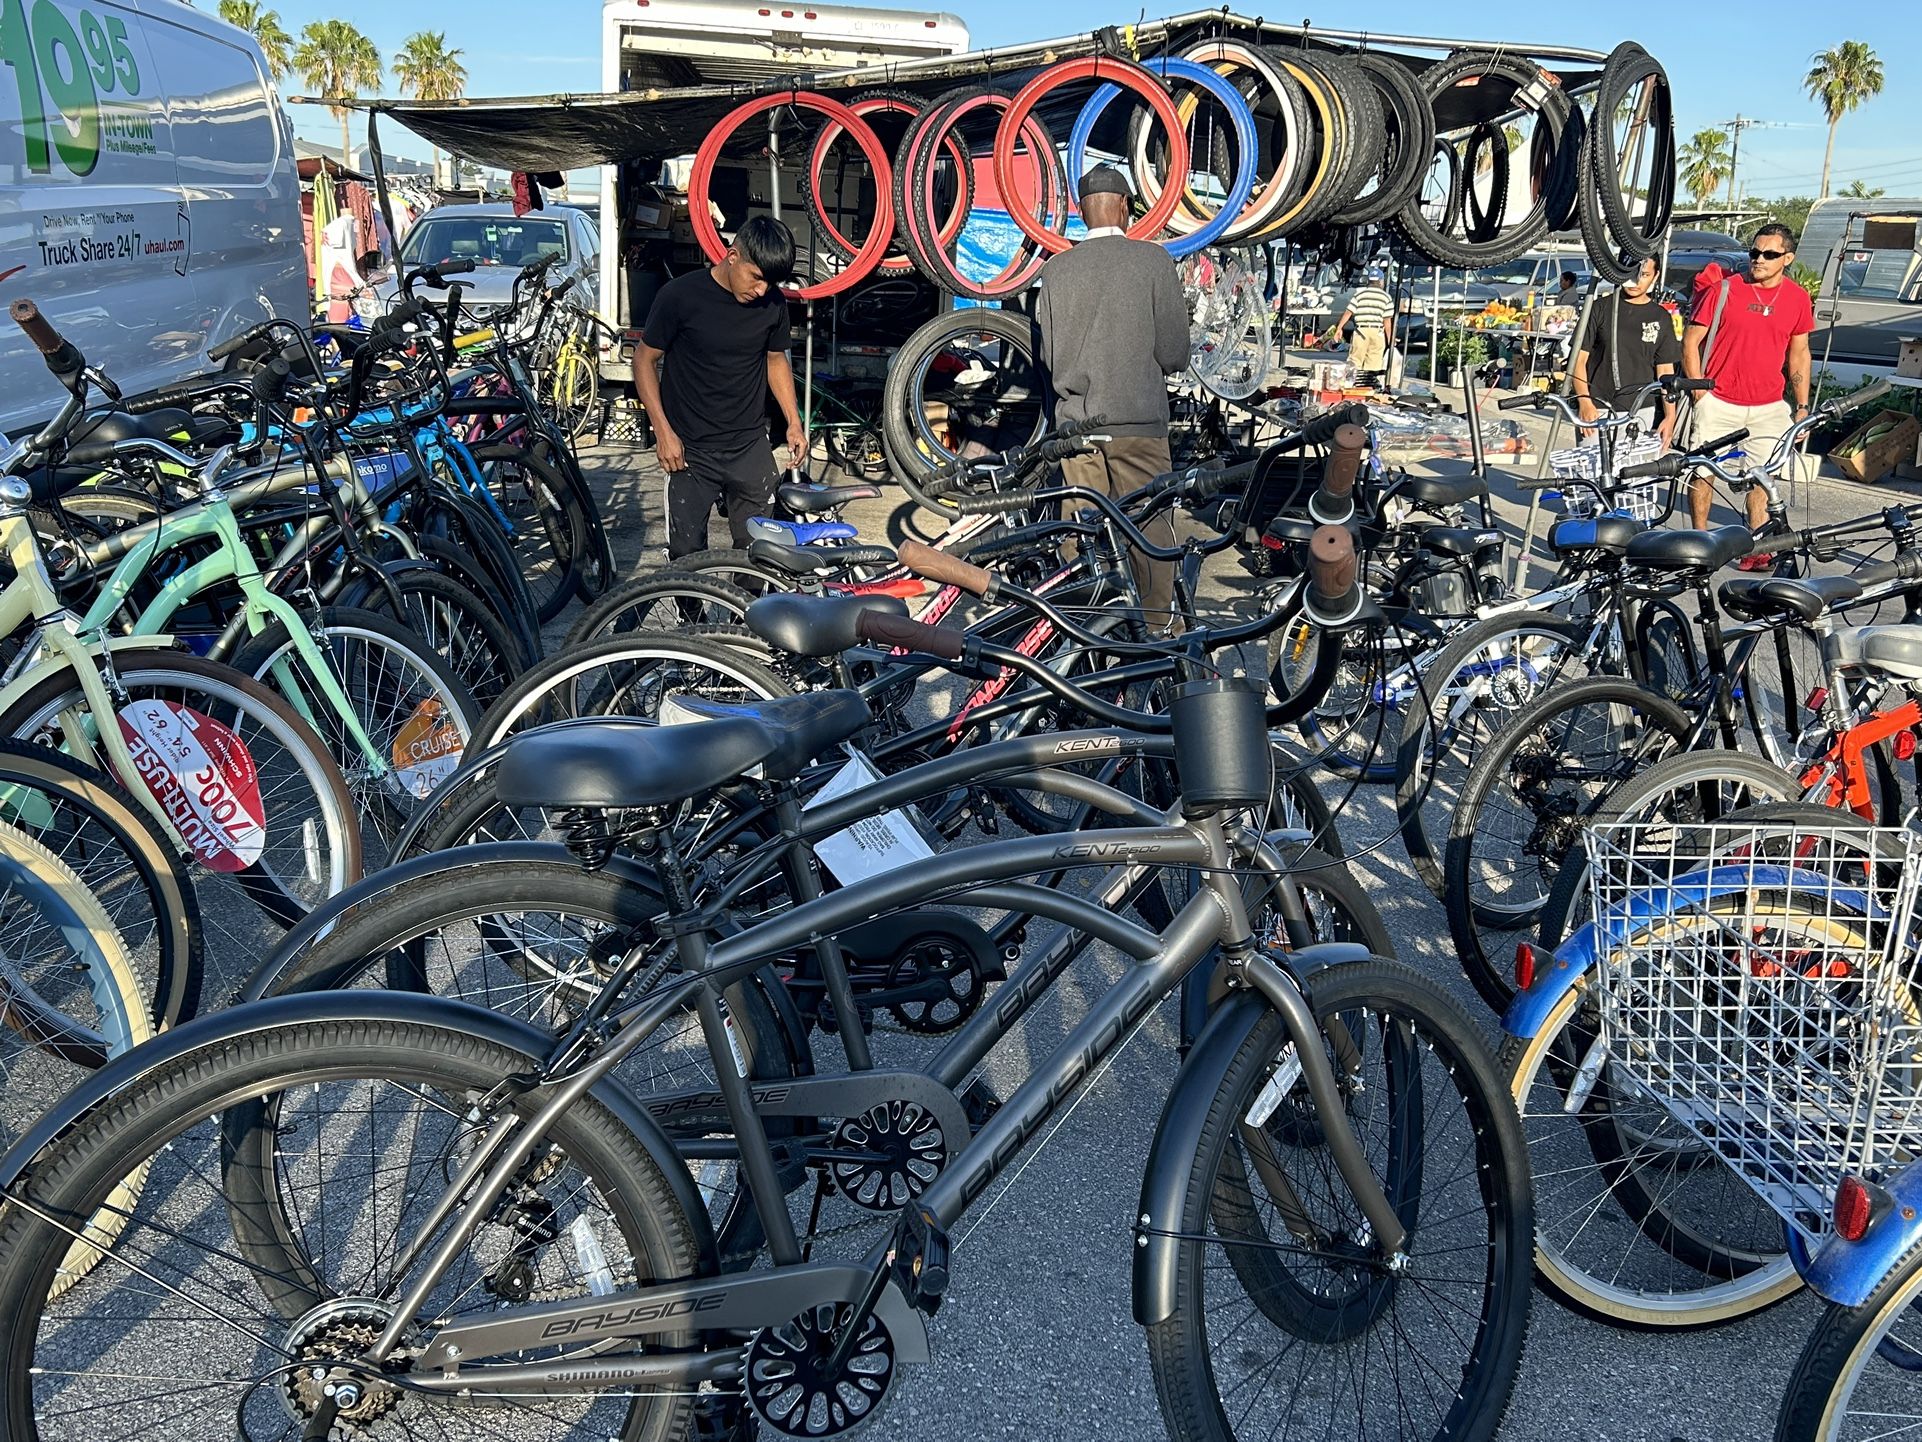 🚨FOR SALE BICYCLES & ELECTRIC BIKES 48v & BIKE REPAIR YES! ITS AVAILABLE JUST FOLLOW THE ADDRESS🚨